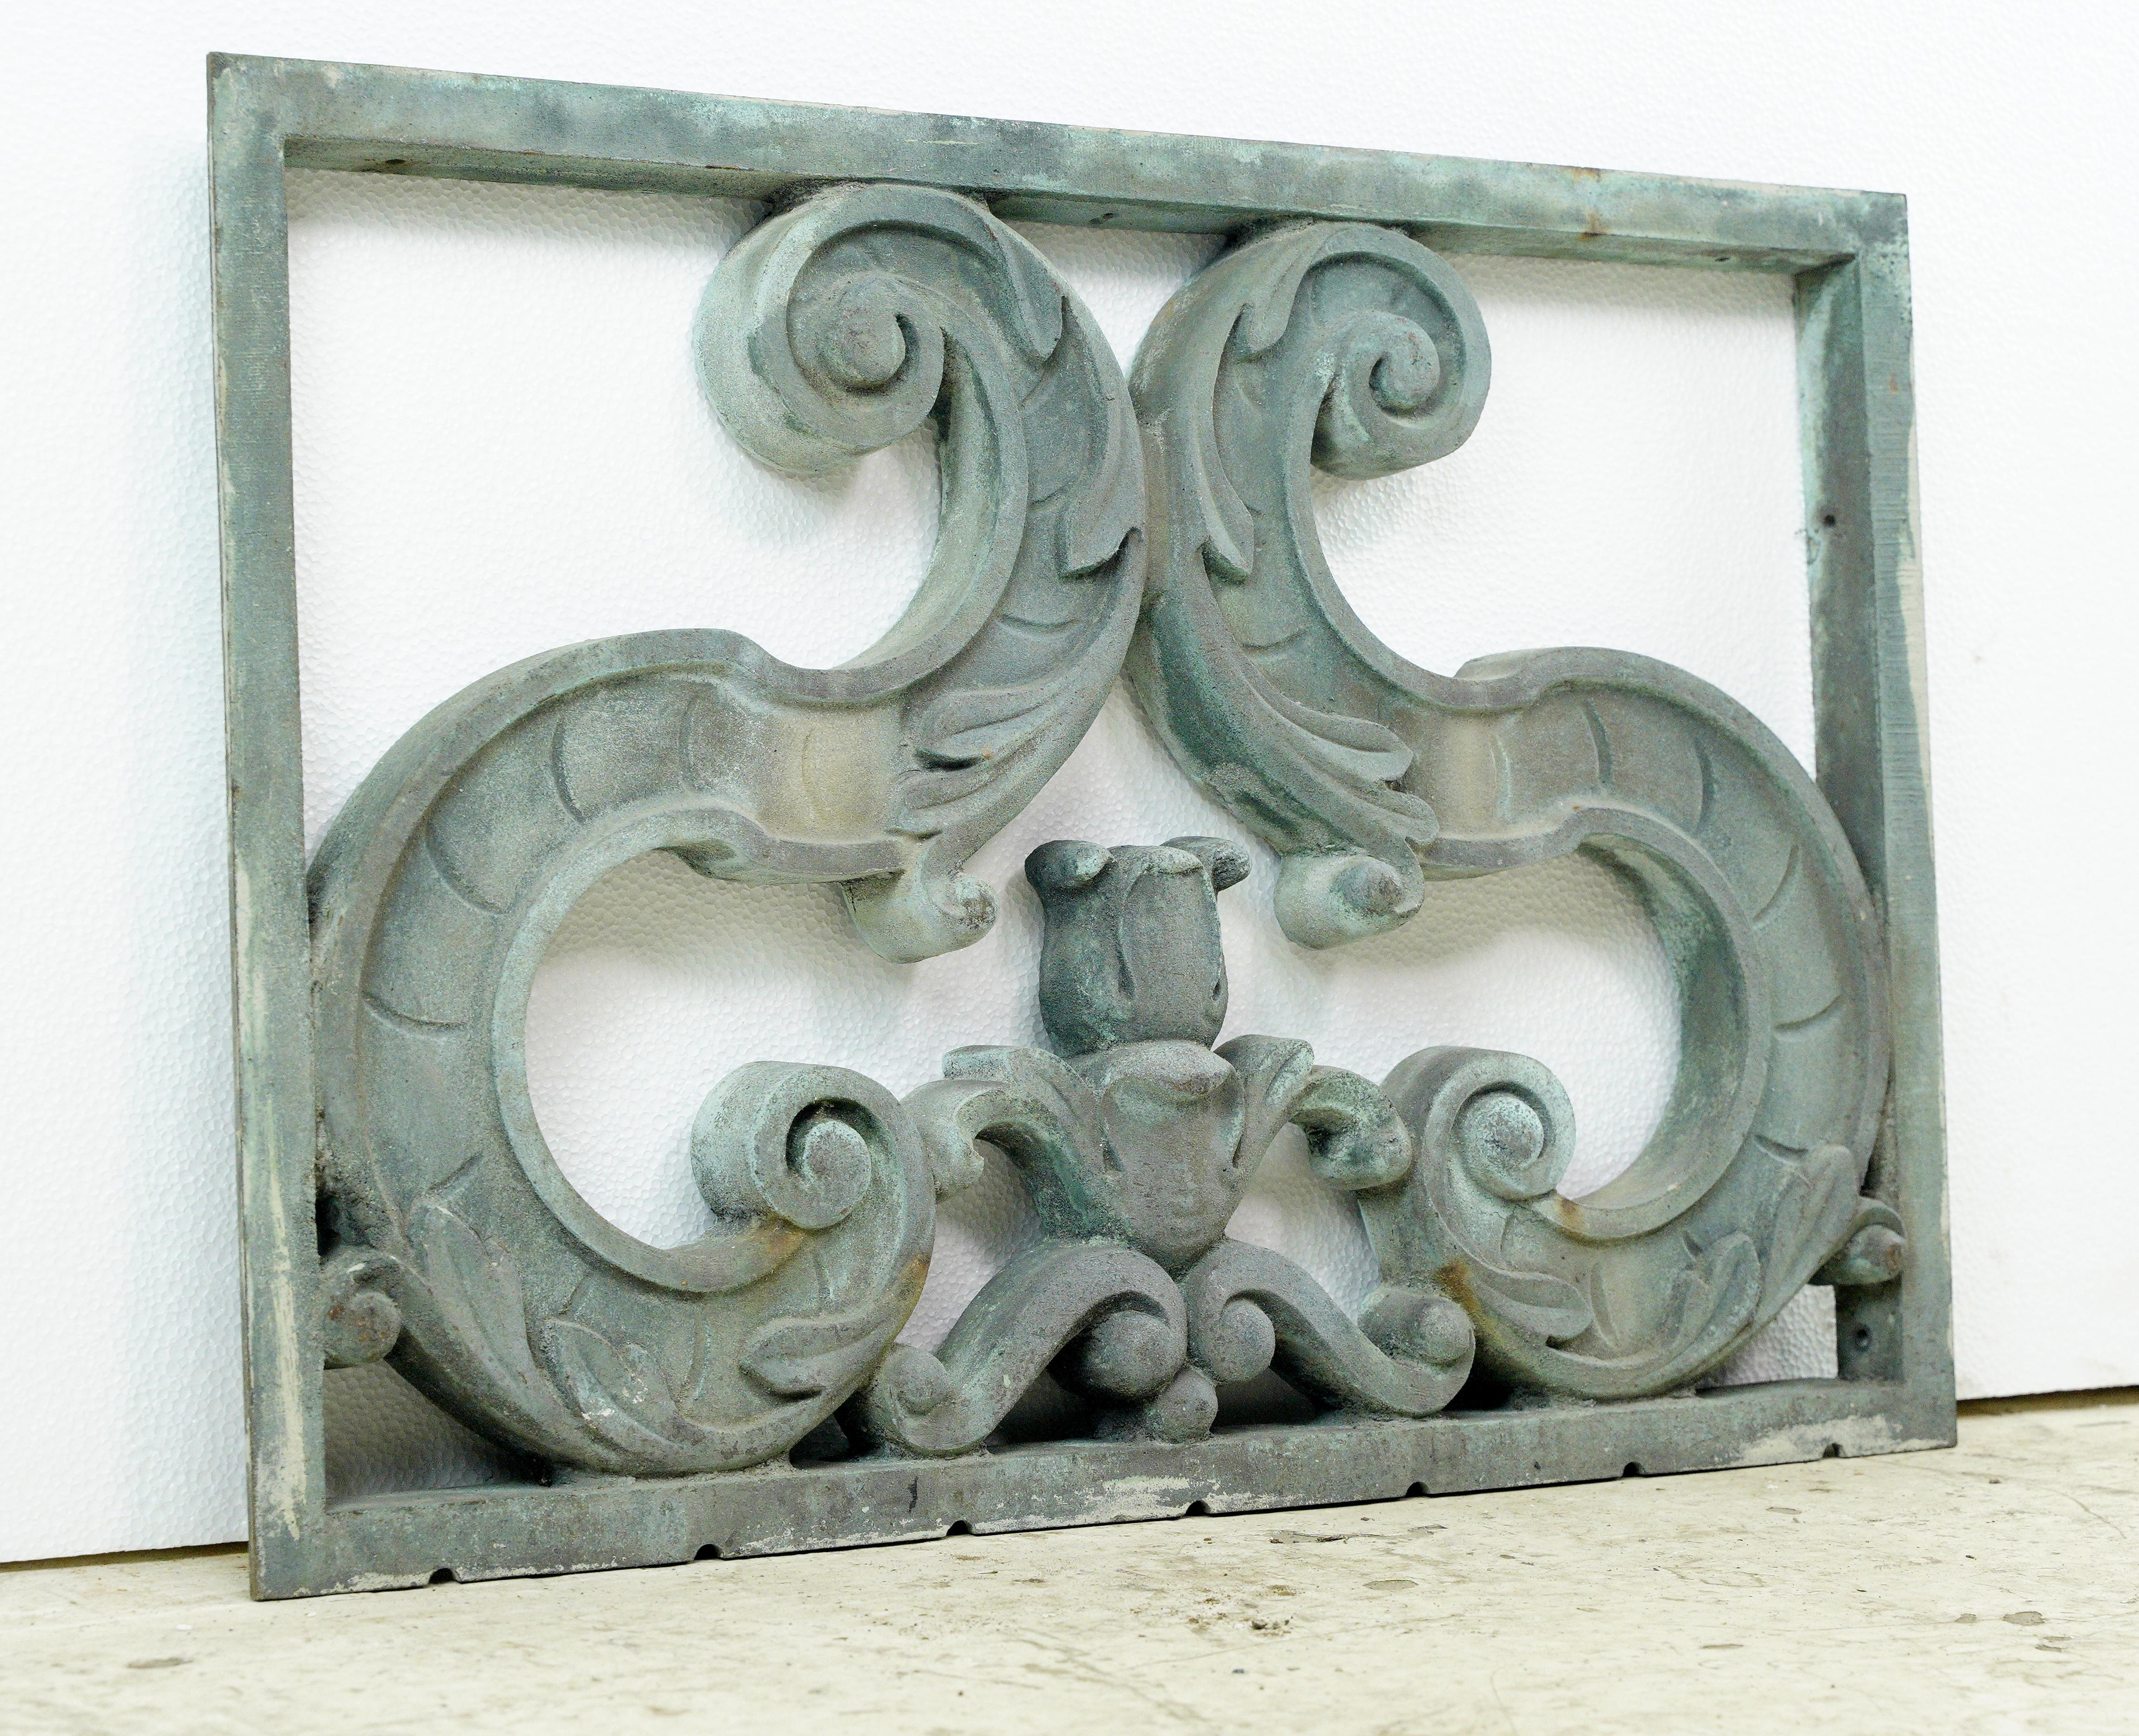 Enhance your exterior with this reclaimed verdigris cast bronze ornamental panel. It's weathered charm and intricate design add a unique and timeless accent to any architectural project or garden space. This is in great condition, with a light green